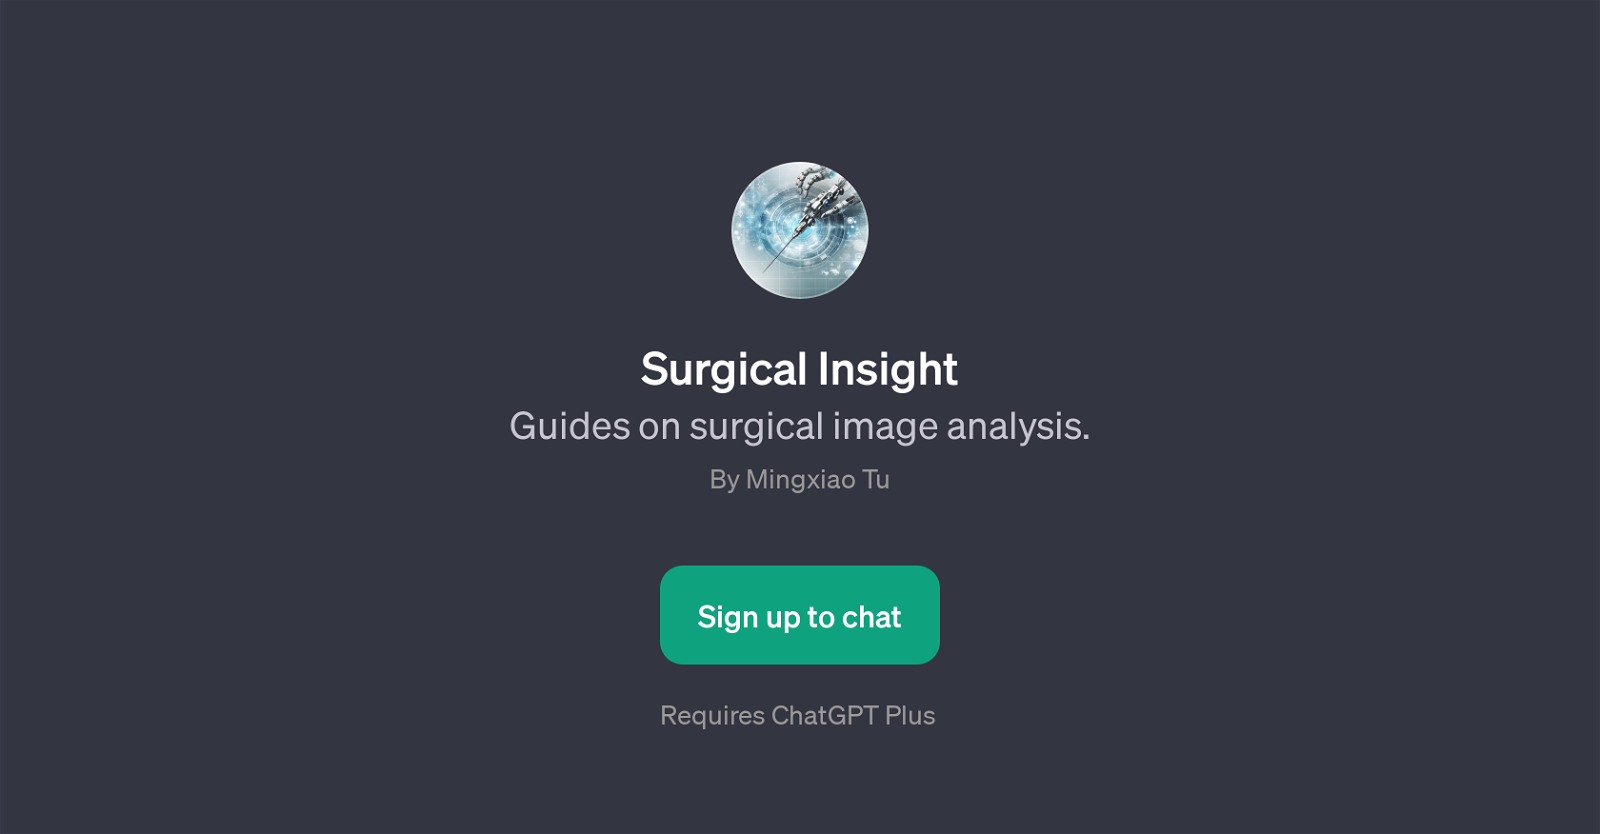 Surgical Insight website